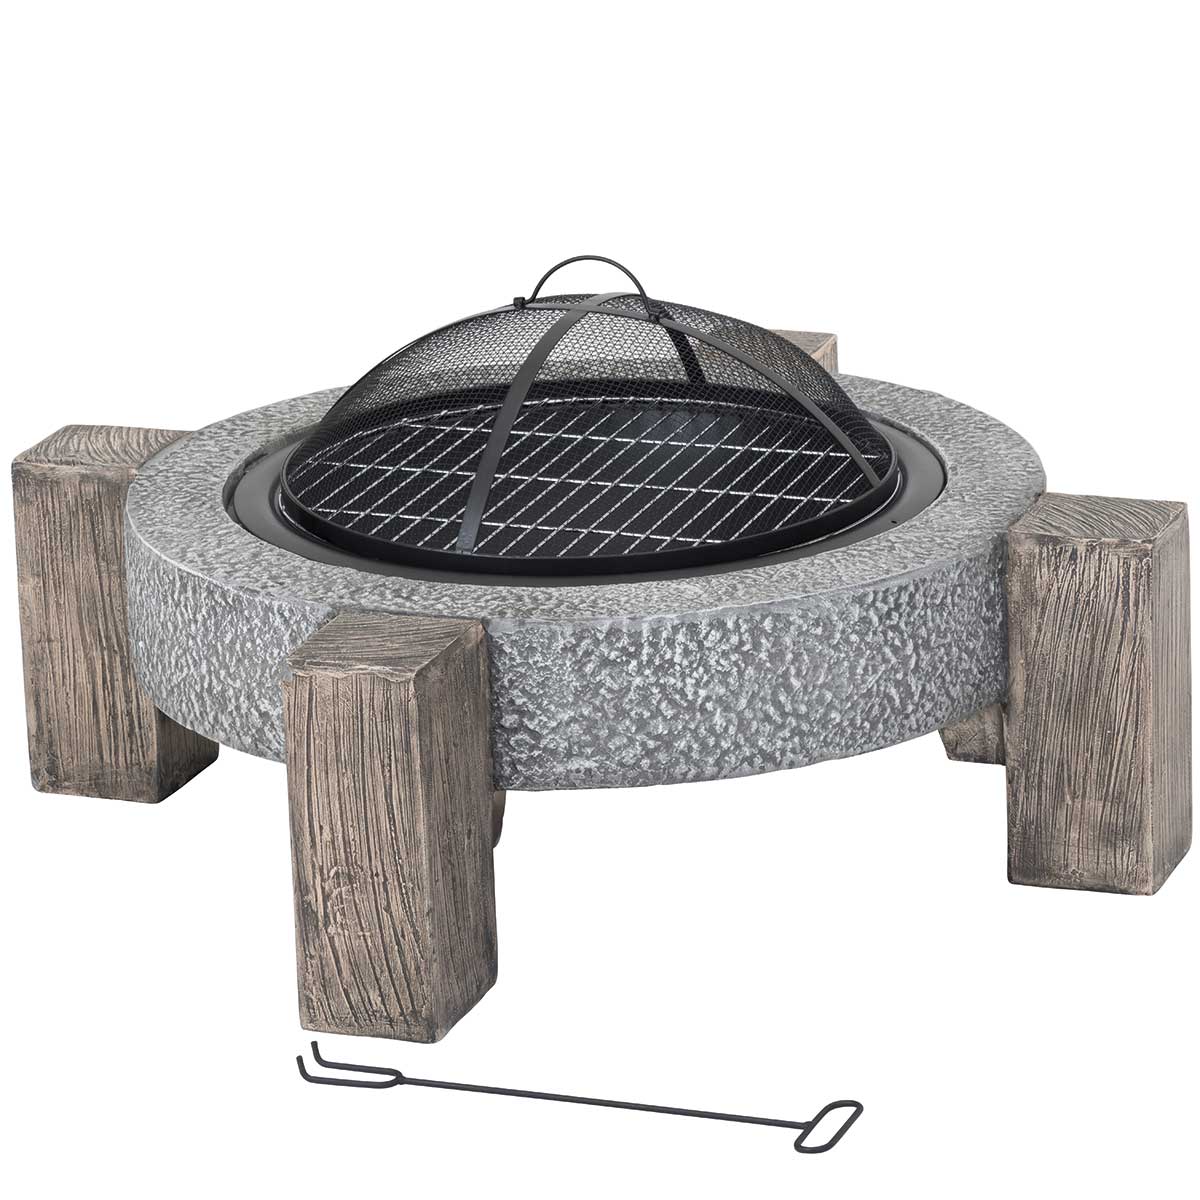 Lifestyle Calida MGO Contemporary Fire Pit JD Catering Equipment Solutions Ltd